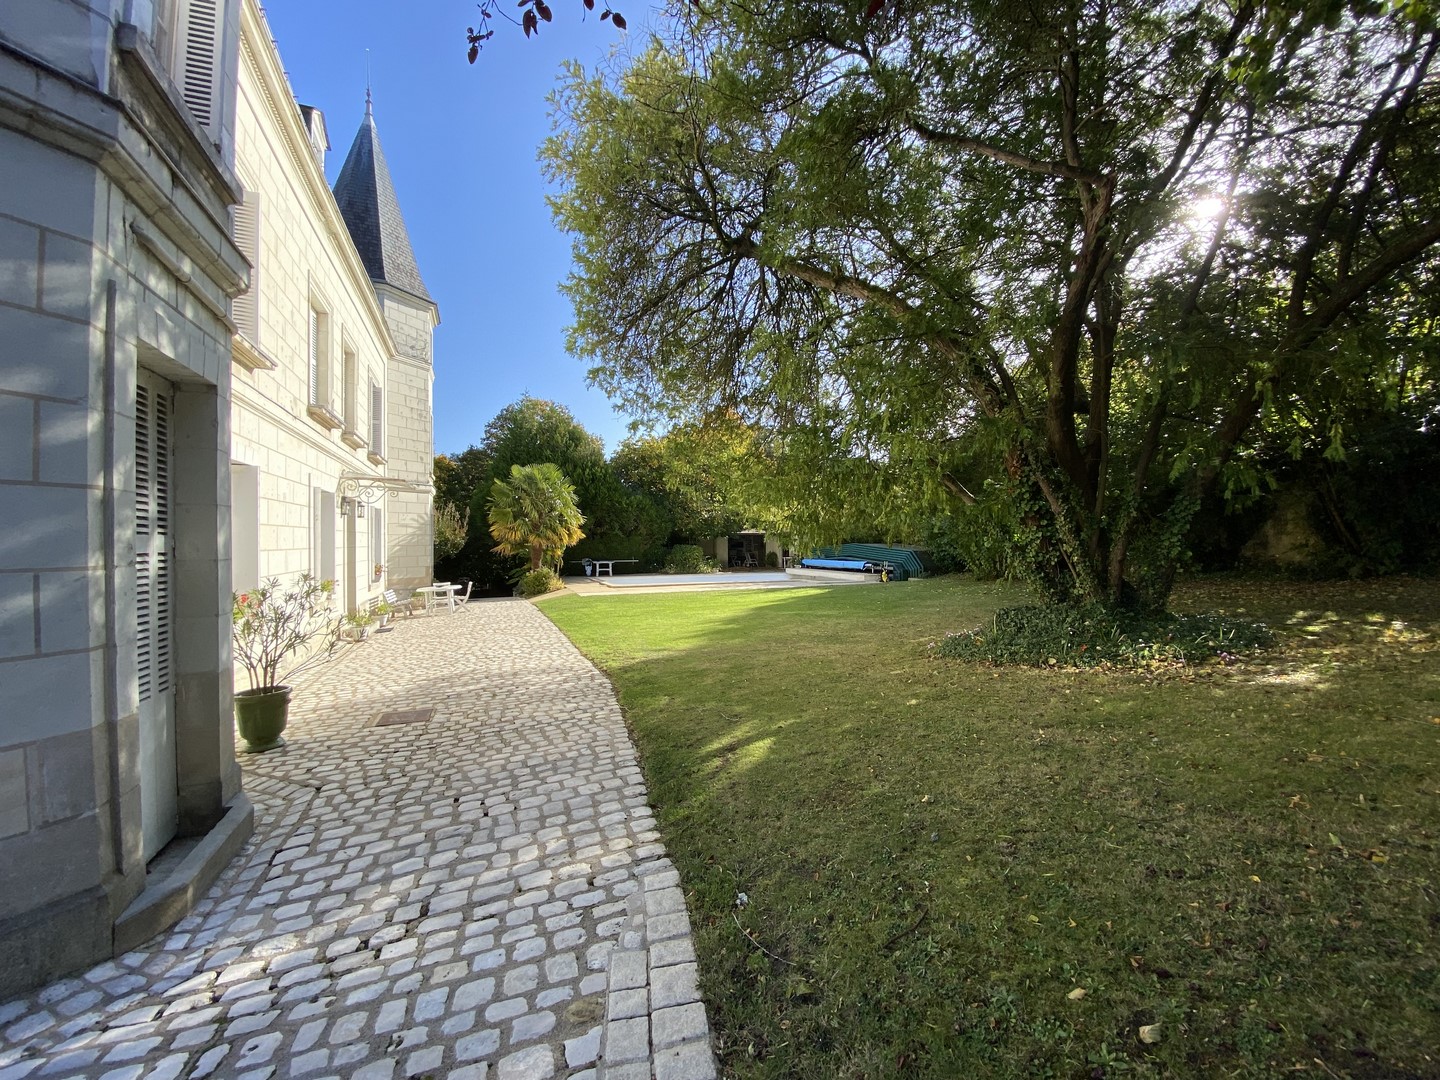 SOUTH of TOURS PROPERTY GARAGE OUTBUILDINGS PARK 3.000m² SWIMMING POOL CAVE